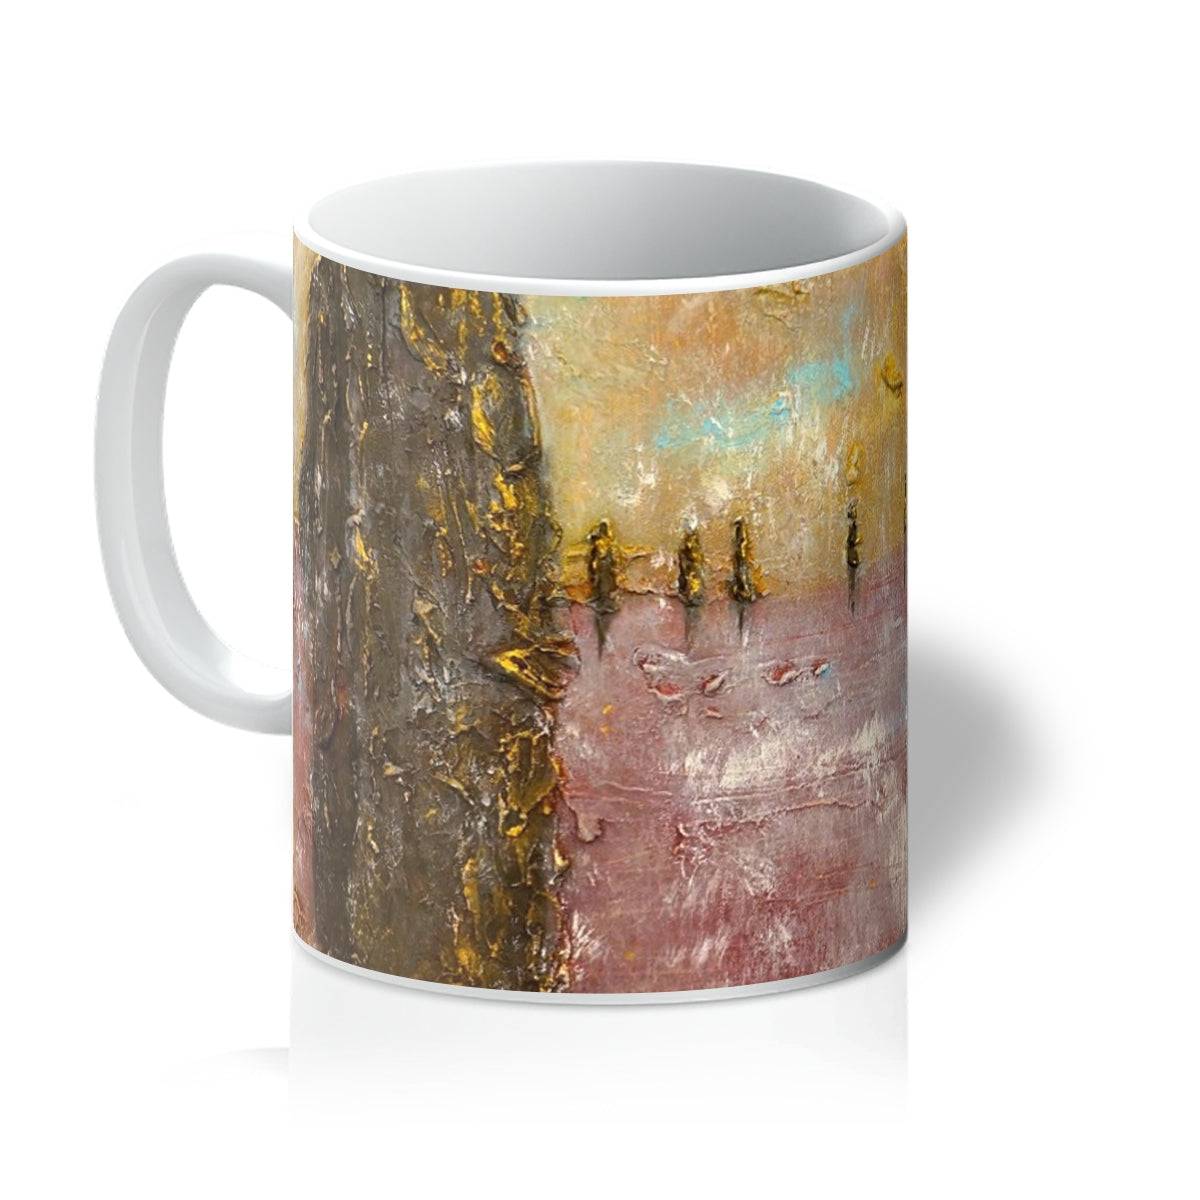 Brodgar Mist Orkney Art Gifts Mug-Mugs-Orkney Art Gallery-11oz-White-Paintings, Prints, Homeware, Art Gifts From Scotland By Scottish Artist Kevin Hunter